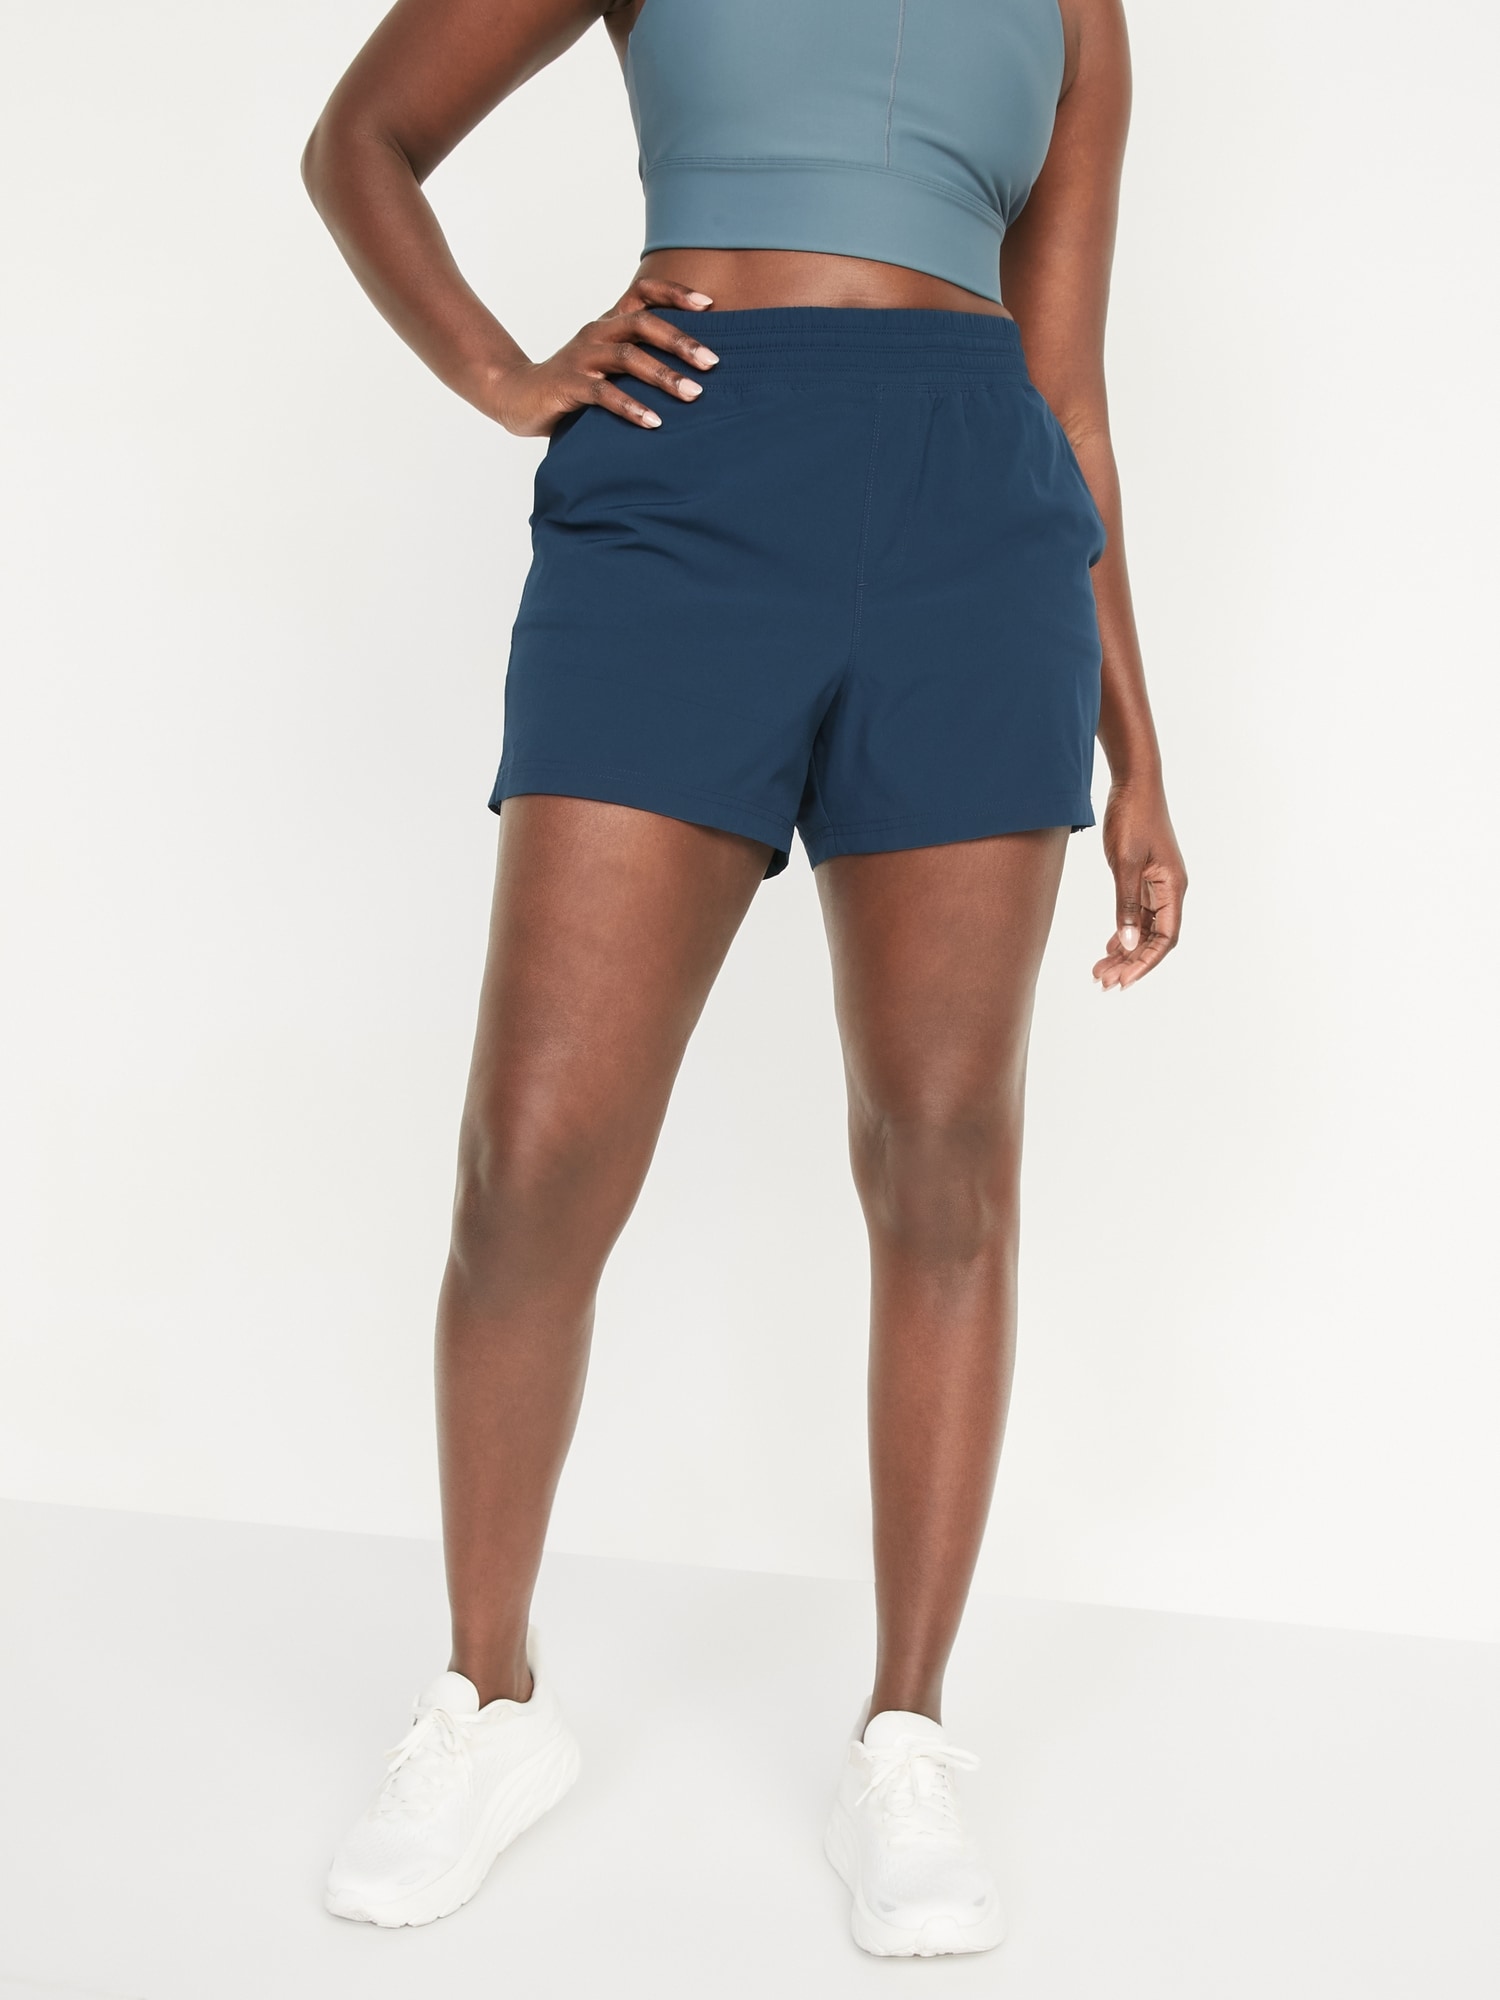 Old Navy Women's High-Waisted StretchTech Shorts -- 4-inch inseam Size 4X